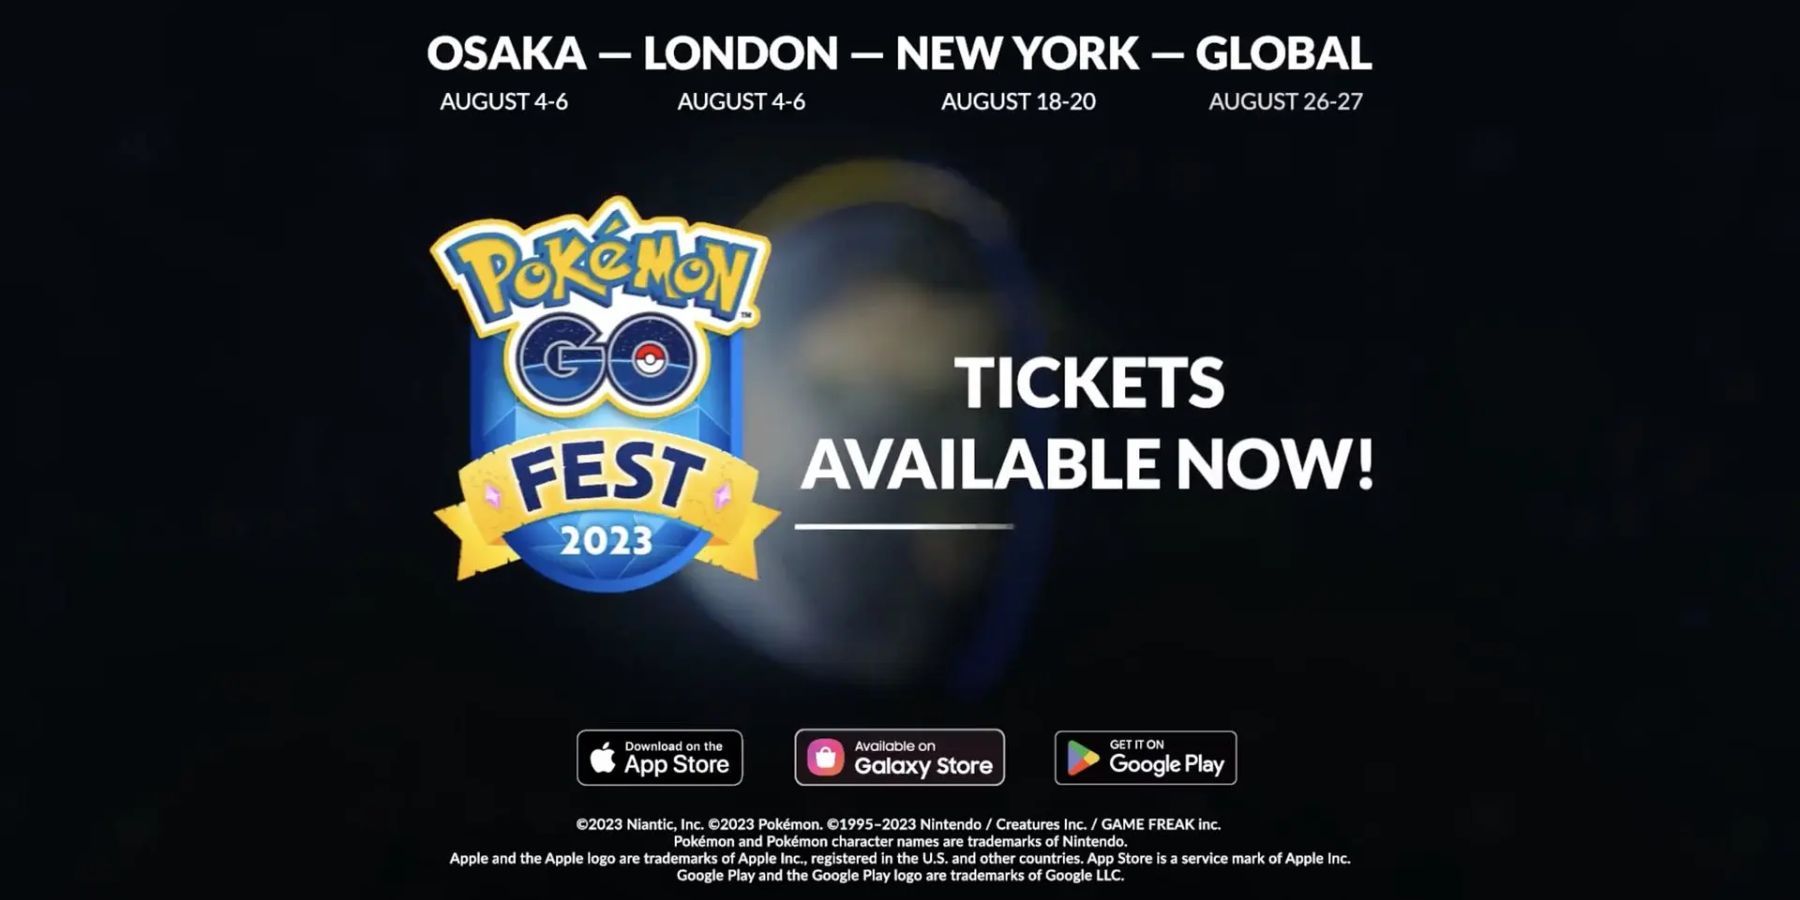 Pokemon GO Fest 2023 Locations, Dates, and Ticket Prices